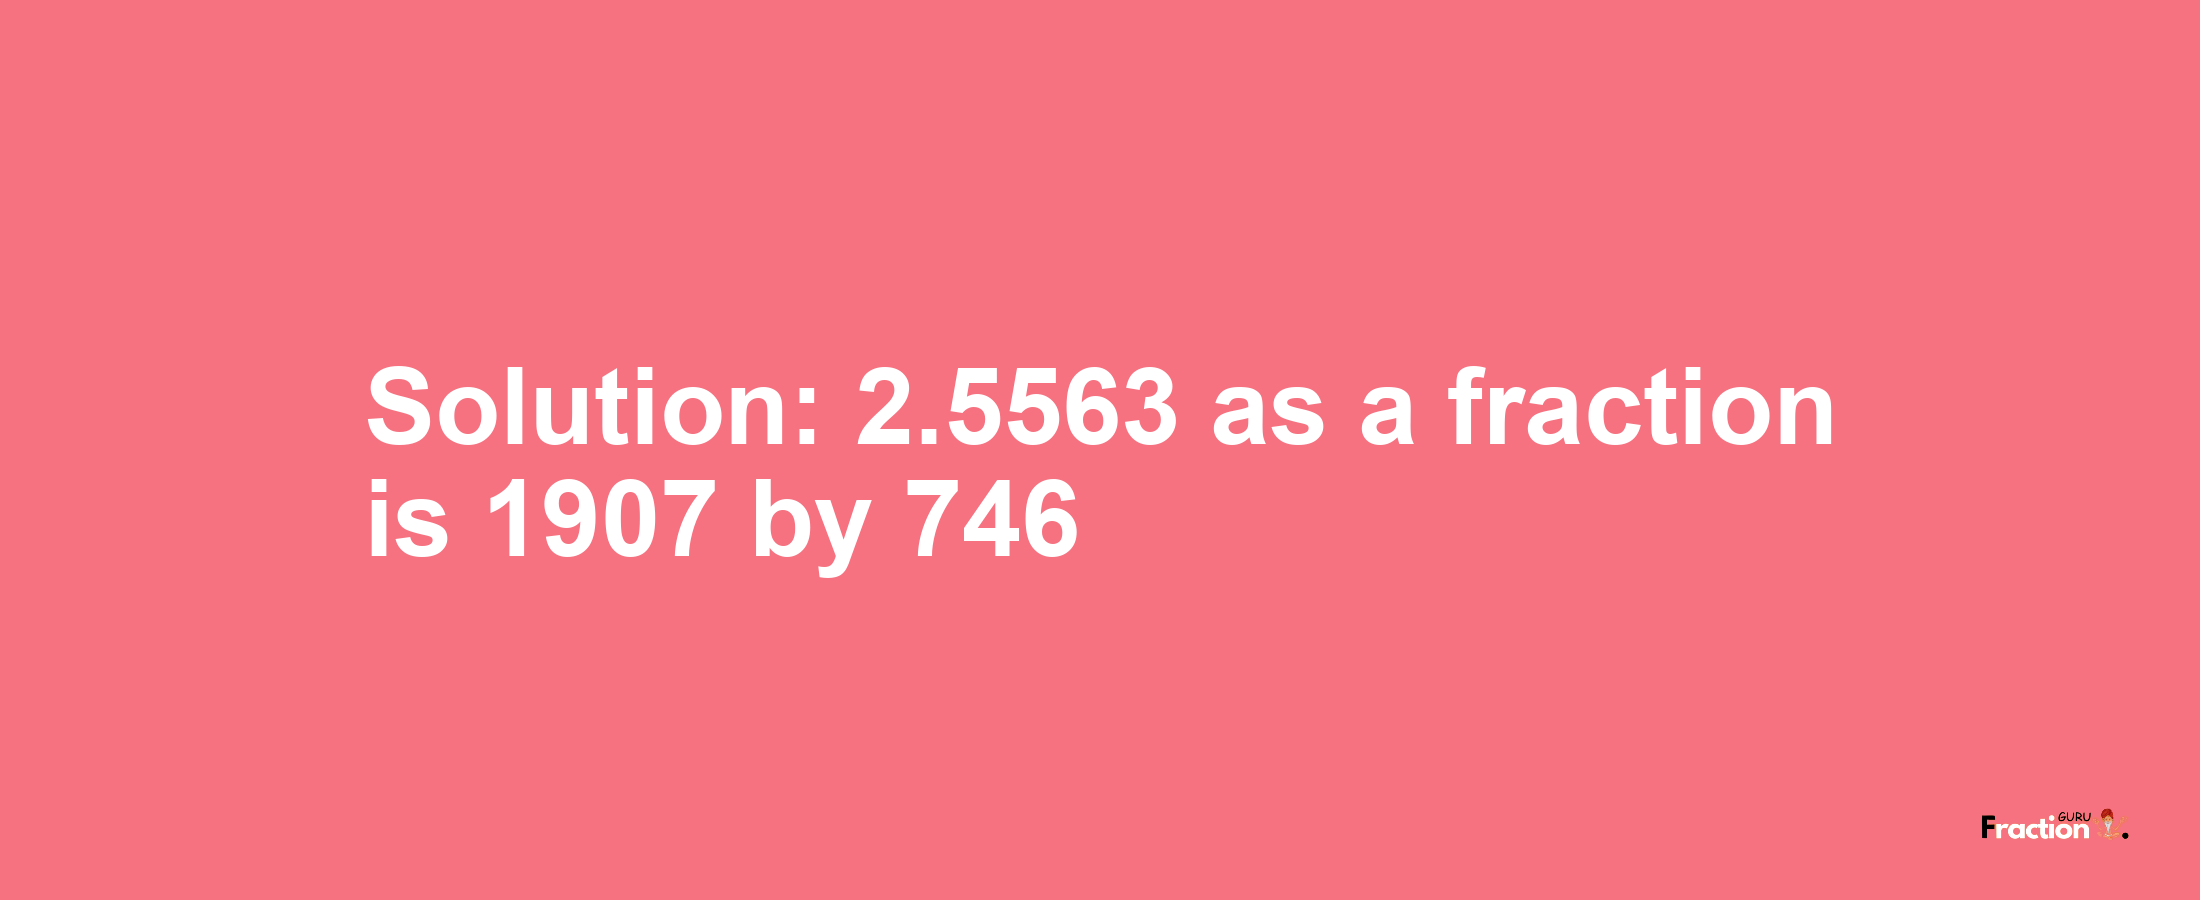 Solution:2.5563 as a fraction is 1907/746